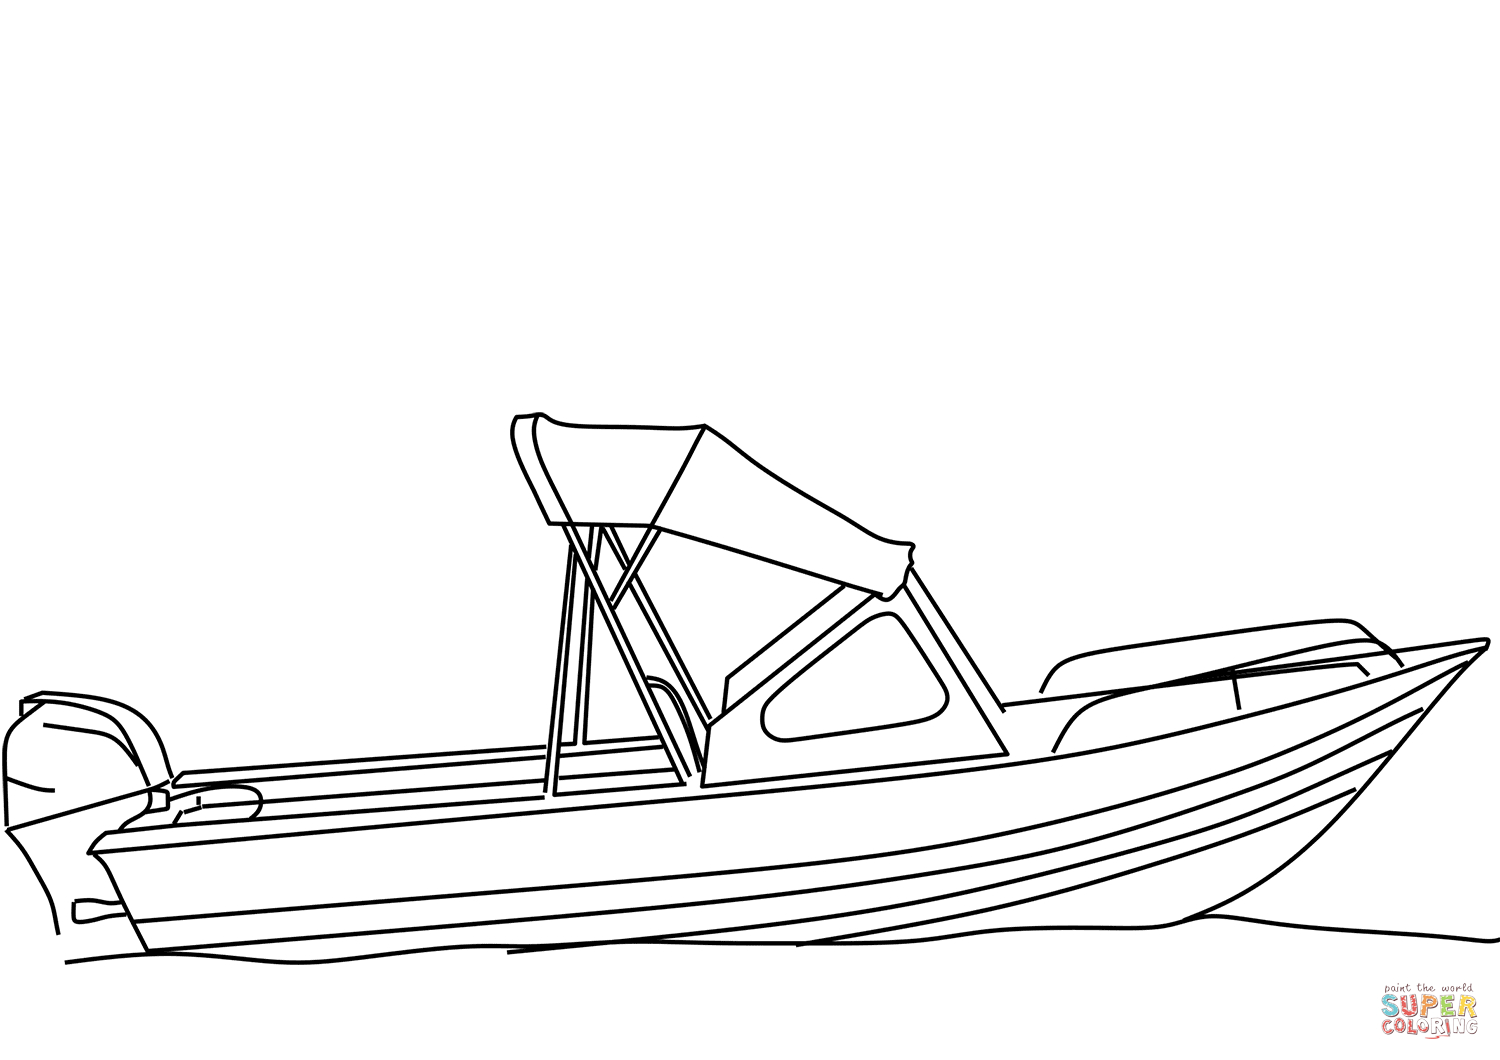 Coloring Ideas : 41 Outstanding Fishing Boat Coloring Pages Coloring - Free Printable Boat Pictures